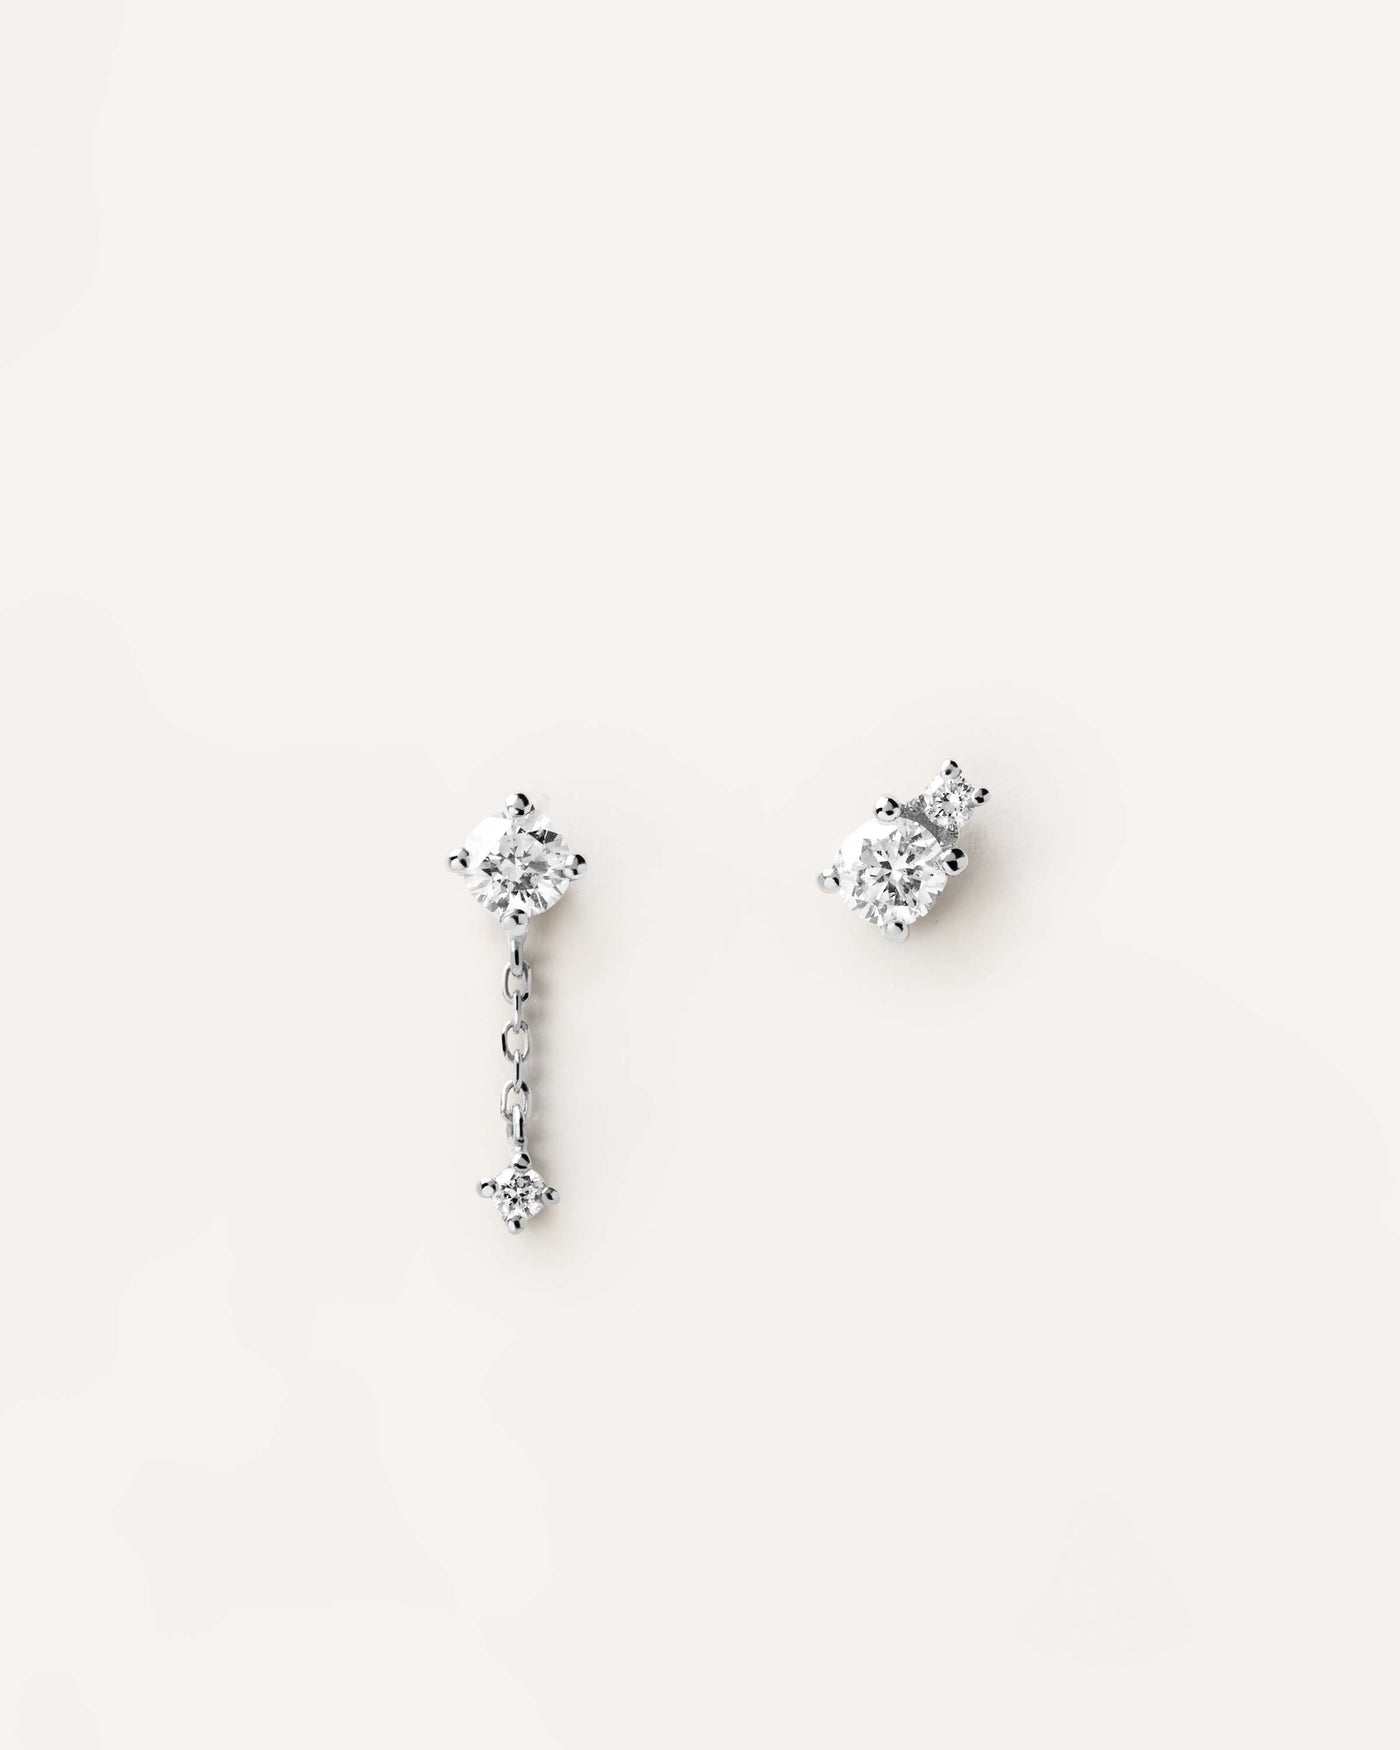 2023 Selection | Diamonds and White Gold Asymetric Studs. Asymmetric earrings in solid white gold with 0.23 carats diamonds. Get the latest arrival from PDPAOLA. Place your order safely and get this Best Seller. Free Shipping.